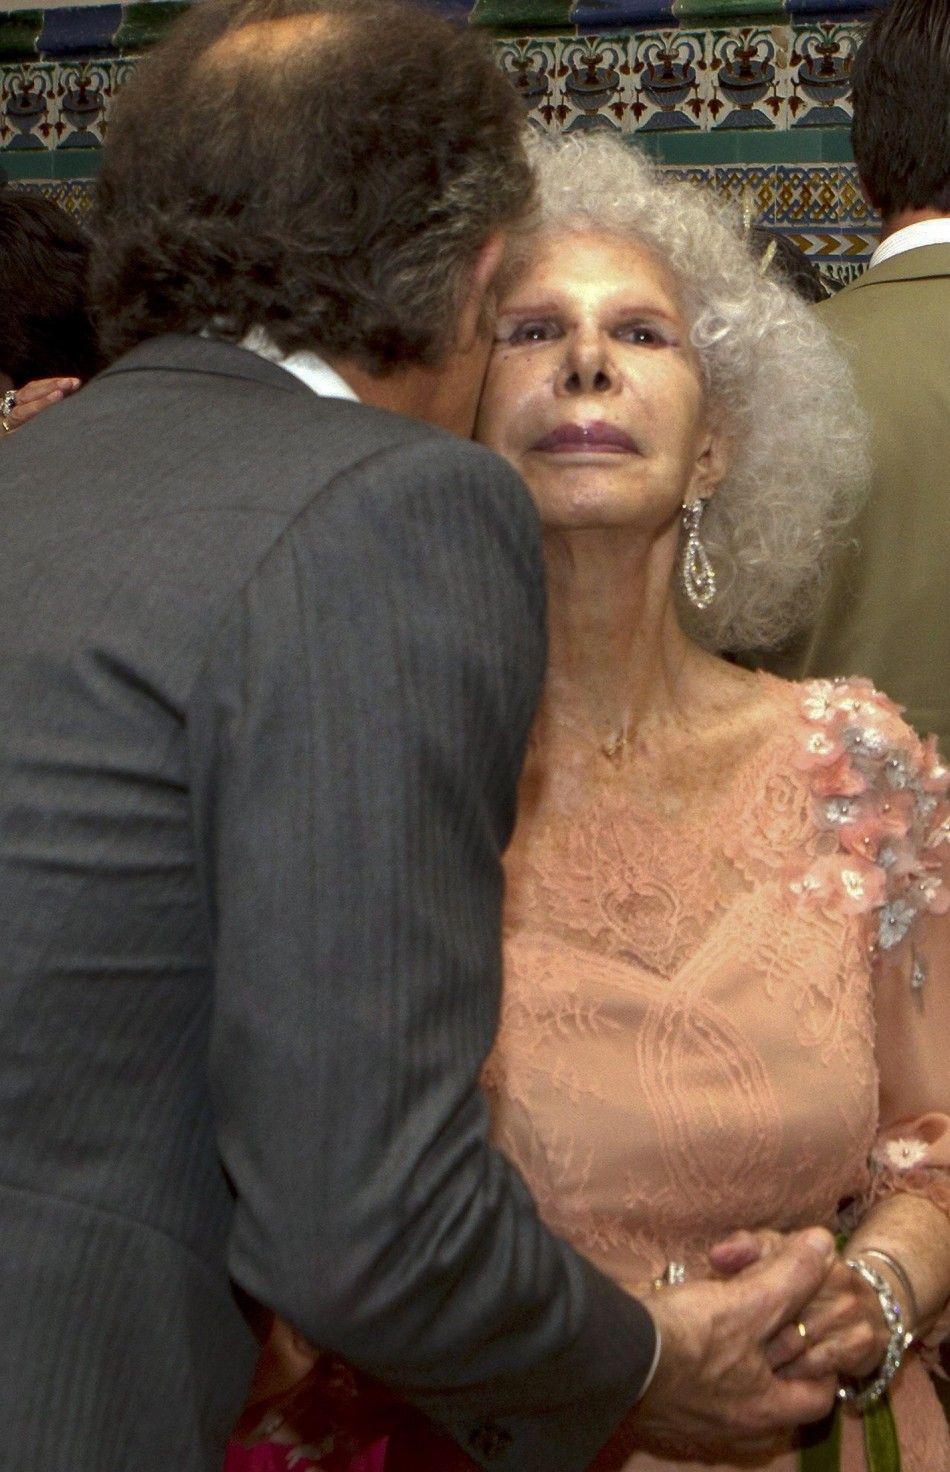 Spains Duchess of Alba Cayetana Fitz-James Stuart y Silva is kissed by her husband Alfonso Diez after their wedding ceremony in Seville